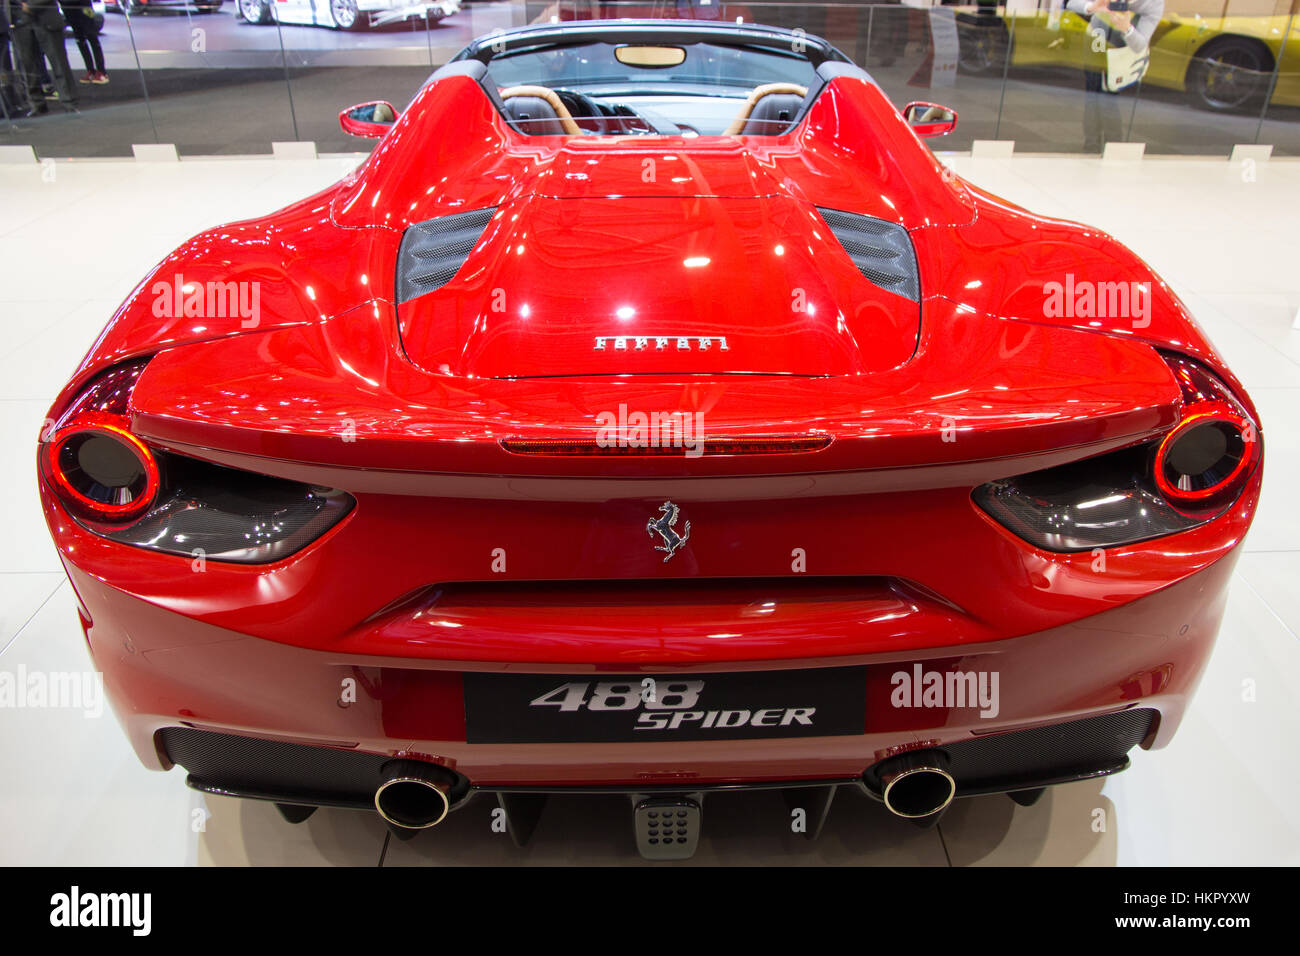 BRUSSELS - JAN 12, 2016: Red Ferrari 488 Spider sports car shown at the Brussels Motor Show. Stock Photo